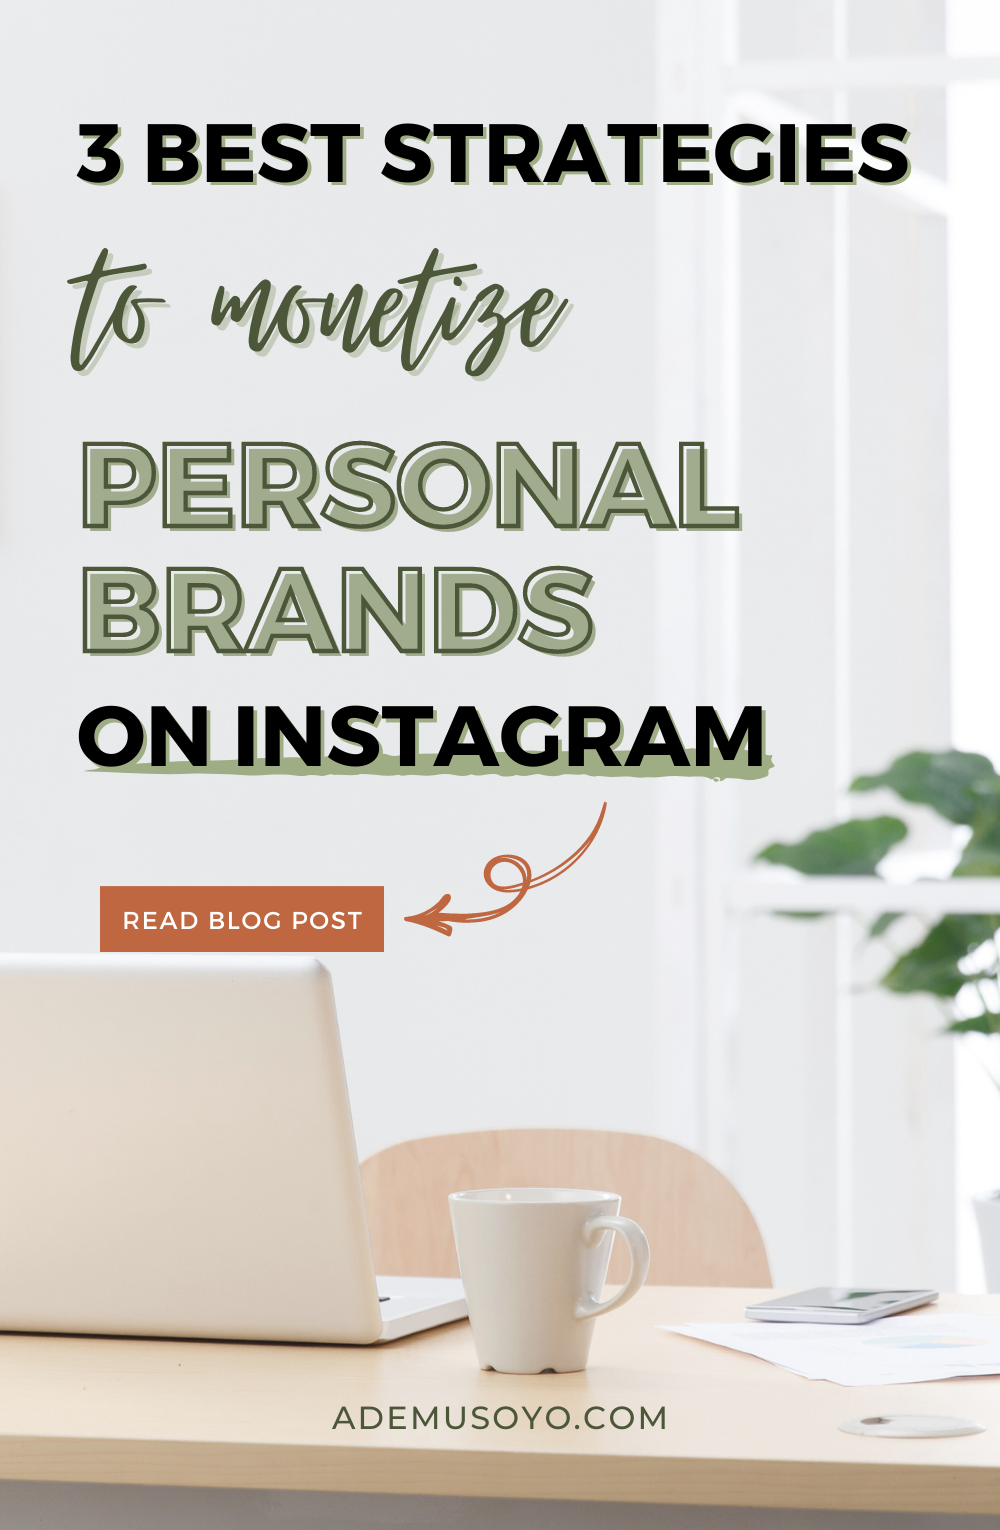 Learn how to monetize your personal brand on Instagram with these 3 straightforward & easy-to-follow steps. Discover how to turn your influence into income and create a profitable online presence. Read this post and don't miss this opportunity to earn from what you already love doing.